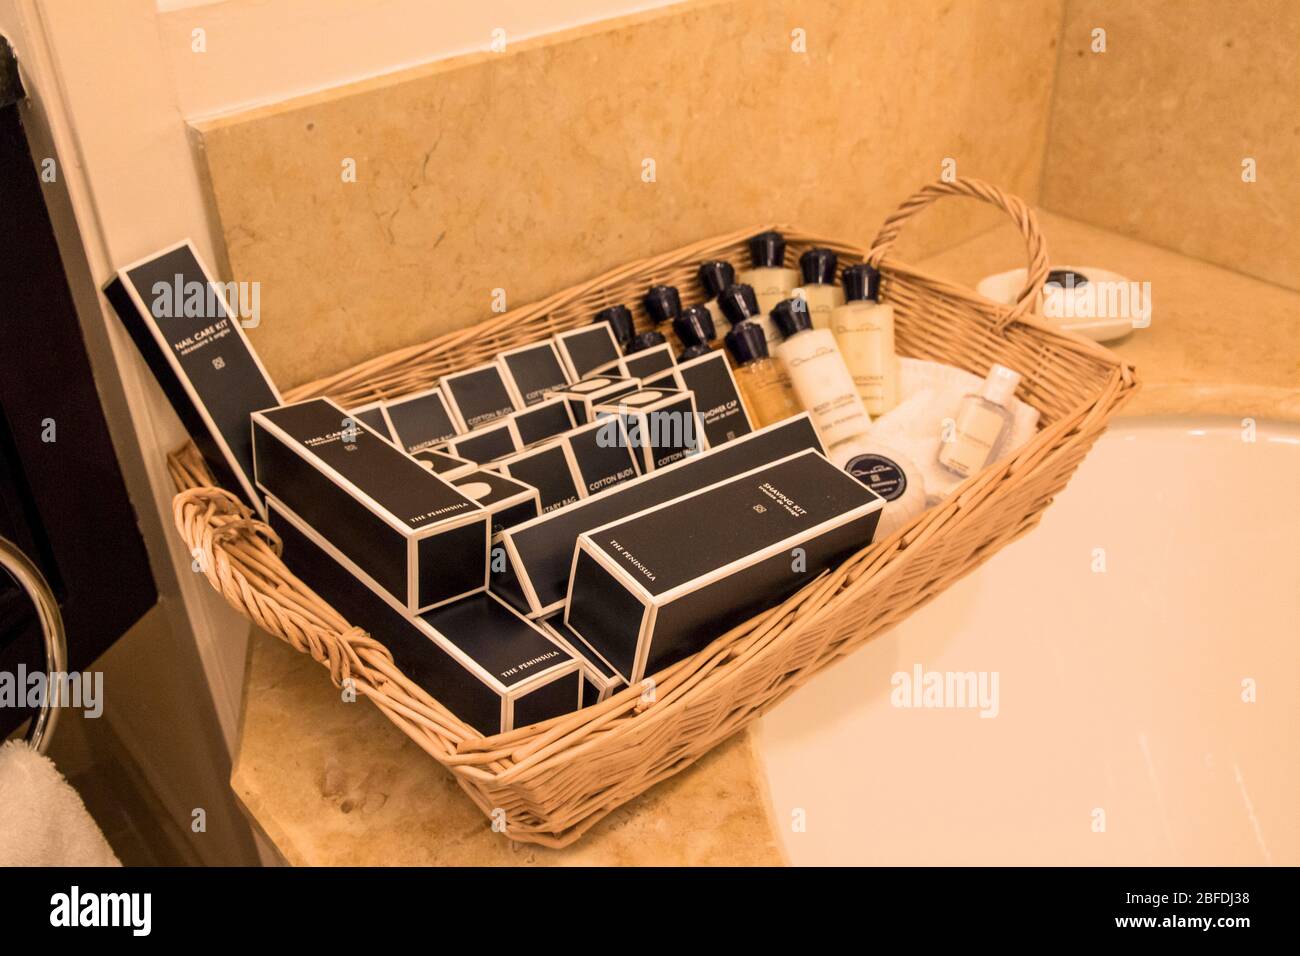 CHICAGO, ILLINOIS, UNITED STATES - DEC 12th, 2015: Hotel amenities kit in the toilet of a luxus suite Stock Photo